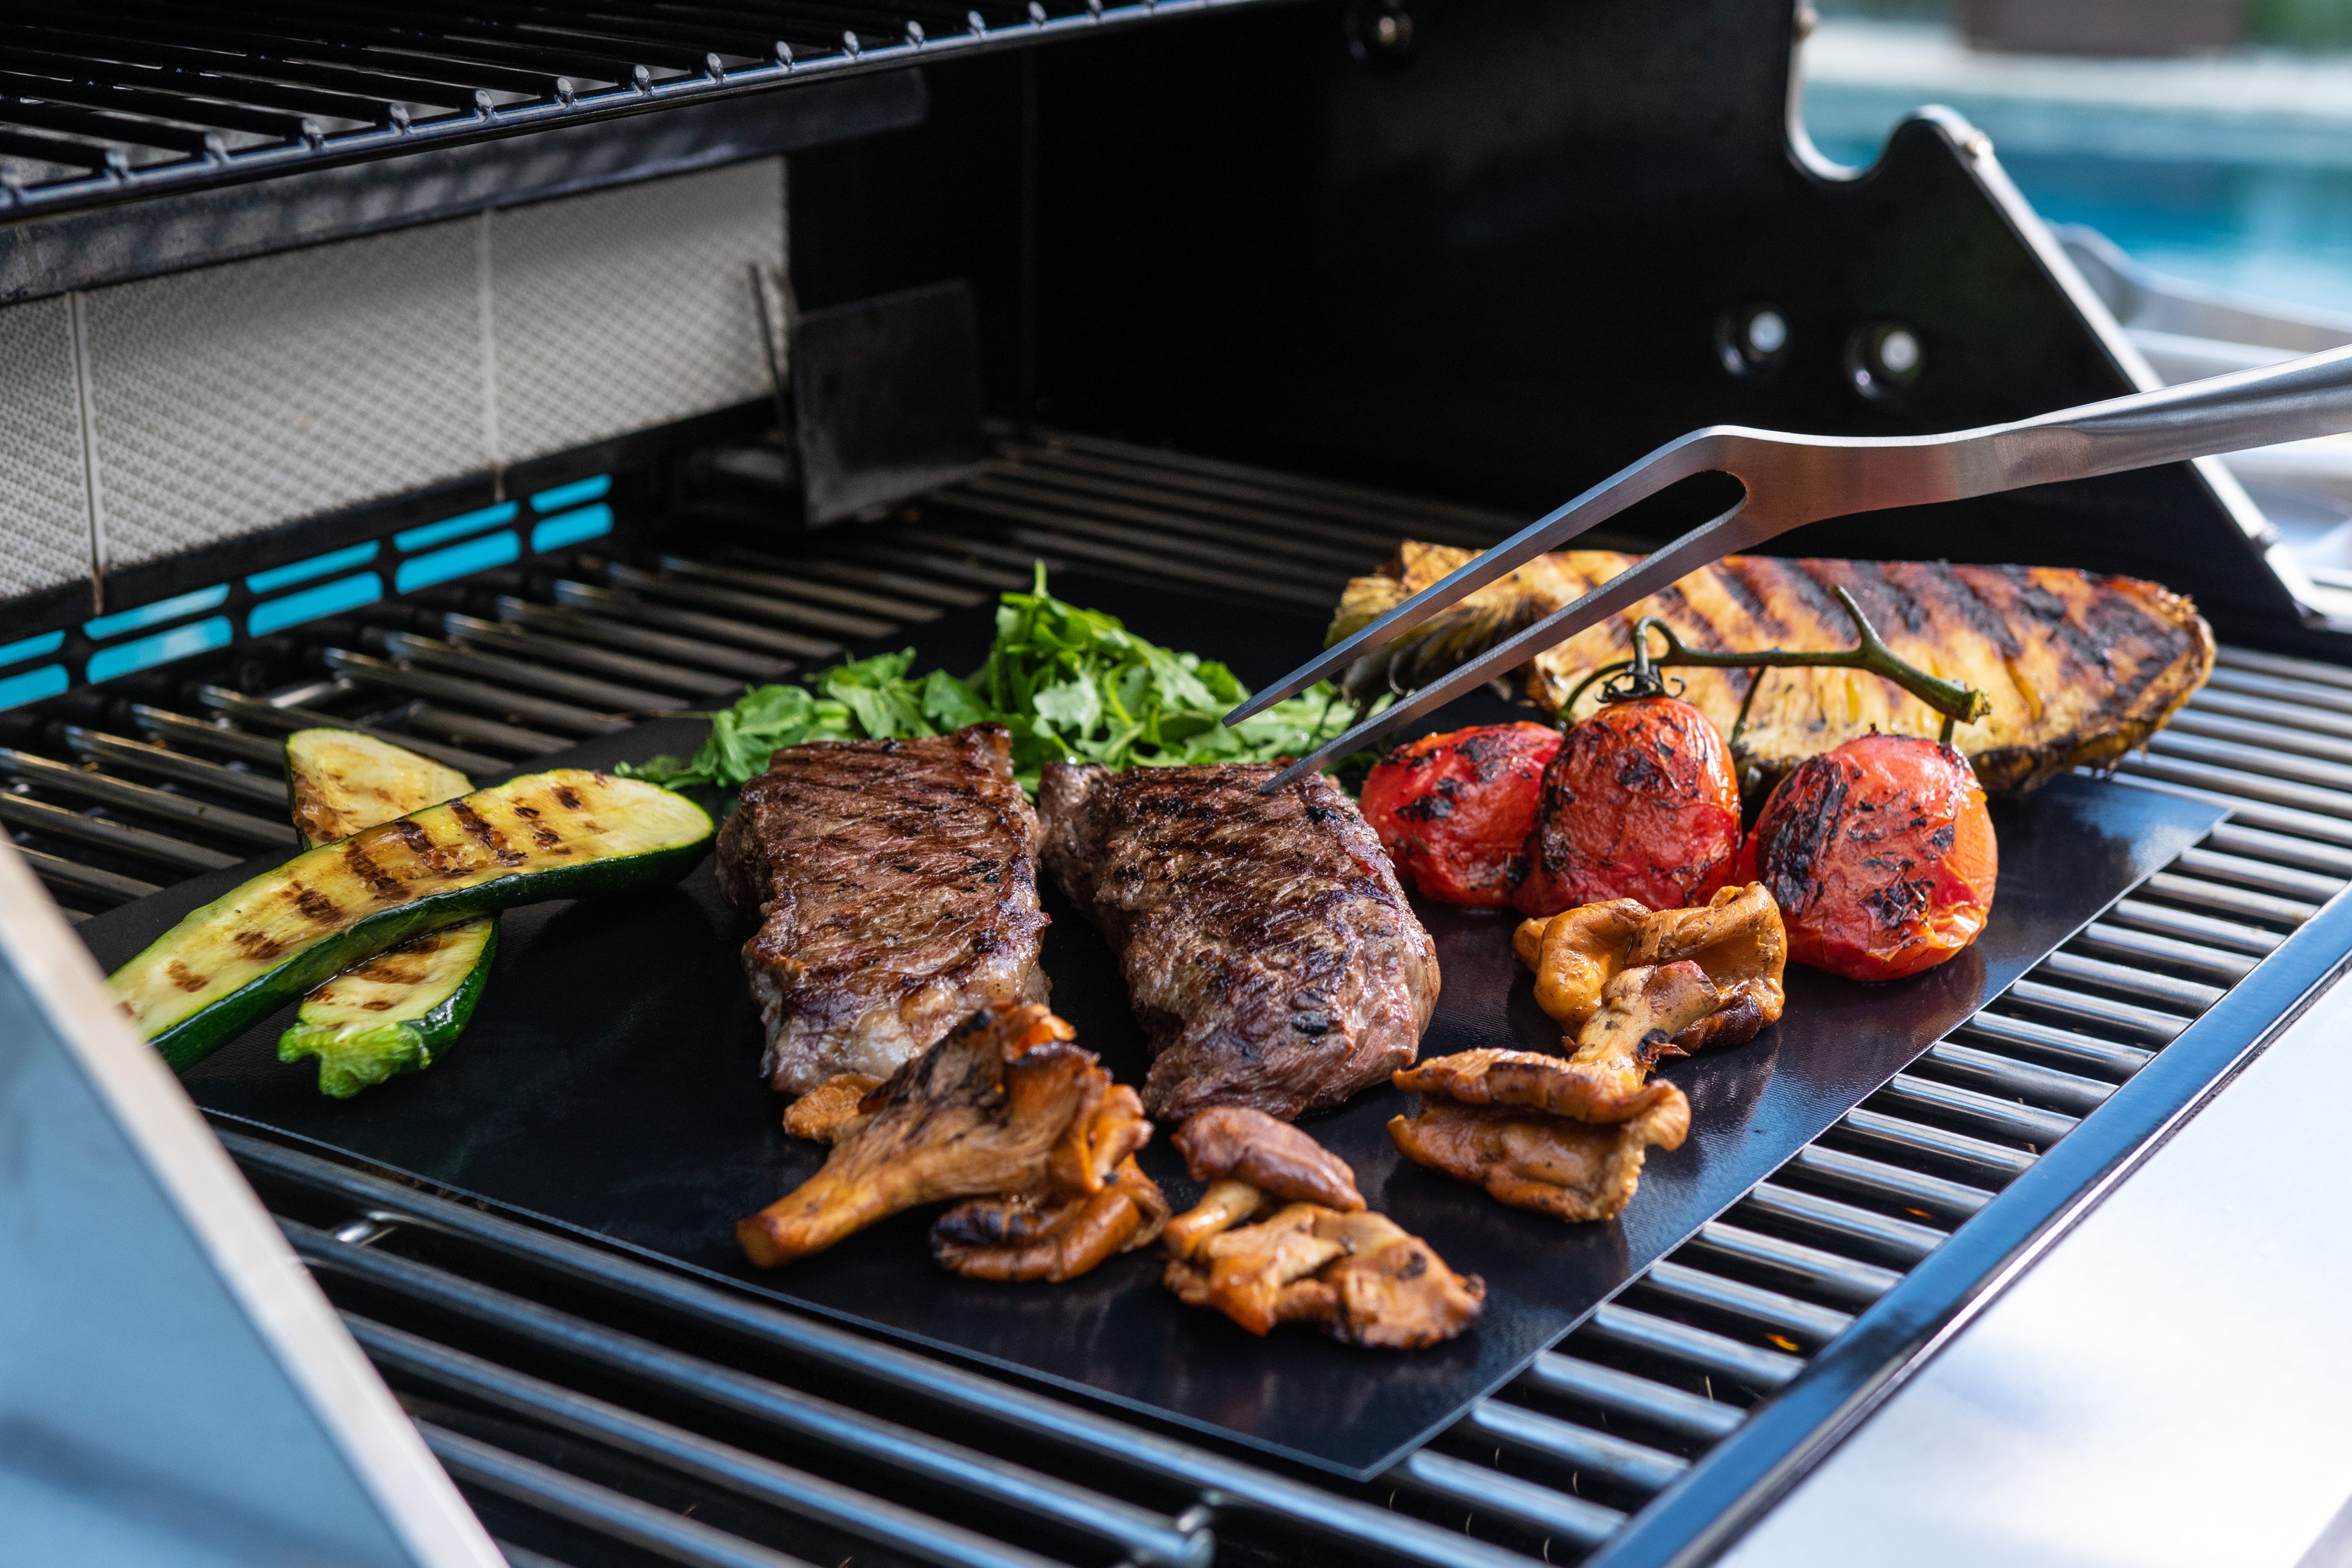 Must-Haves for When You Grill Out